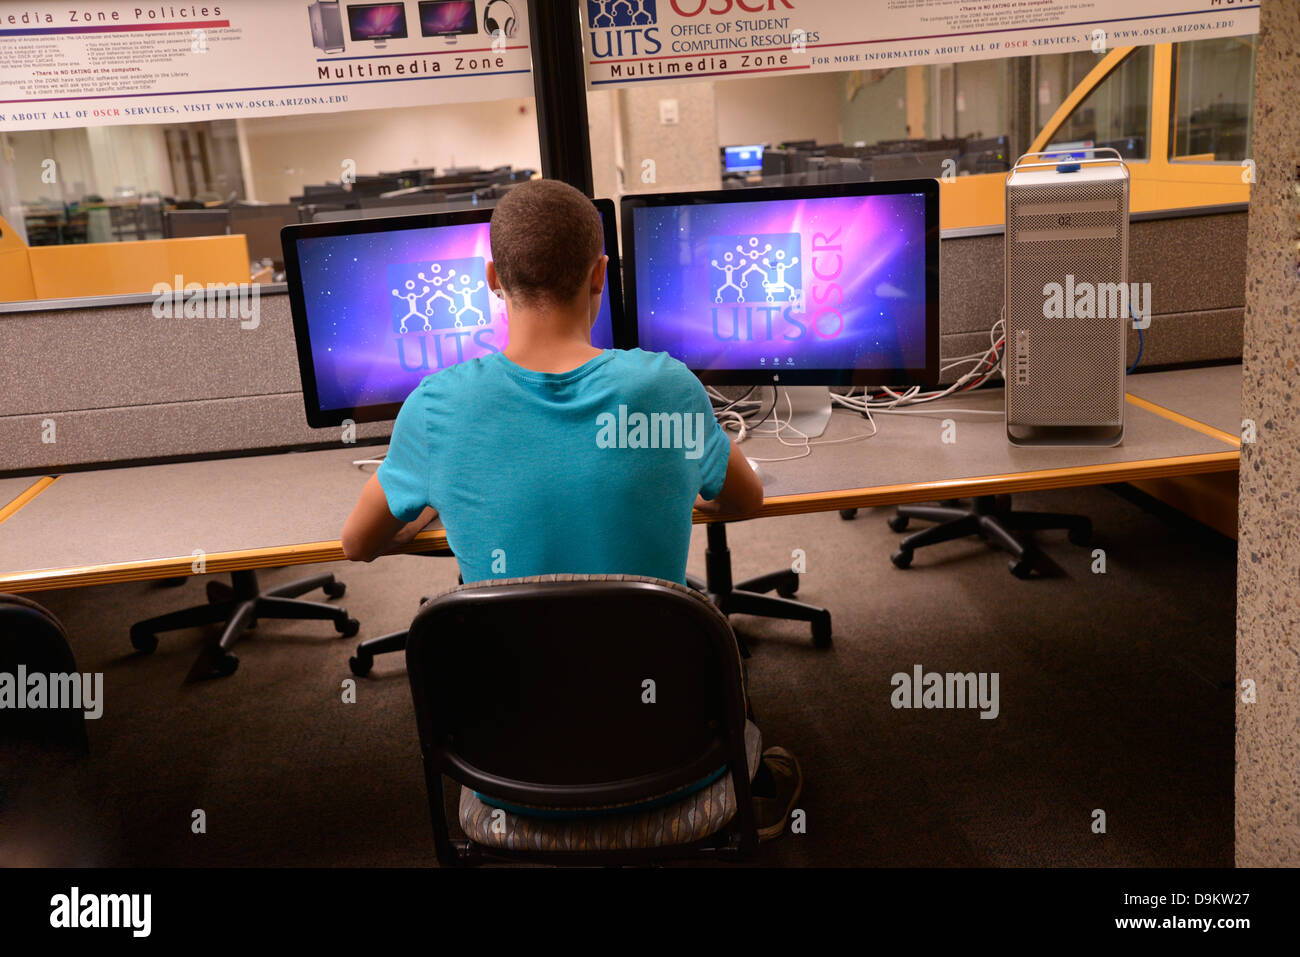 A young man works on a computer in a media center on a college campus. Stock Photo